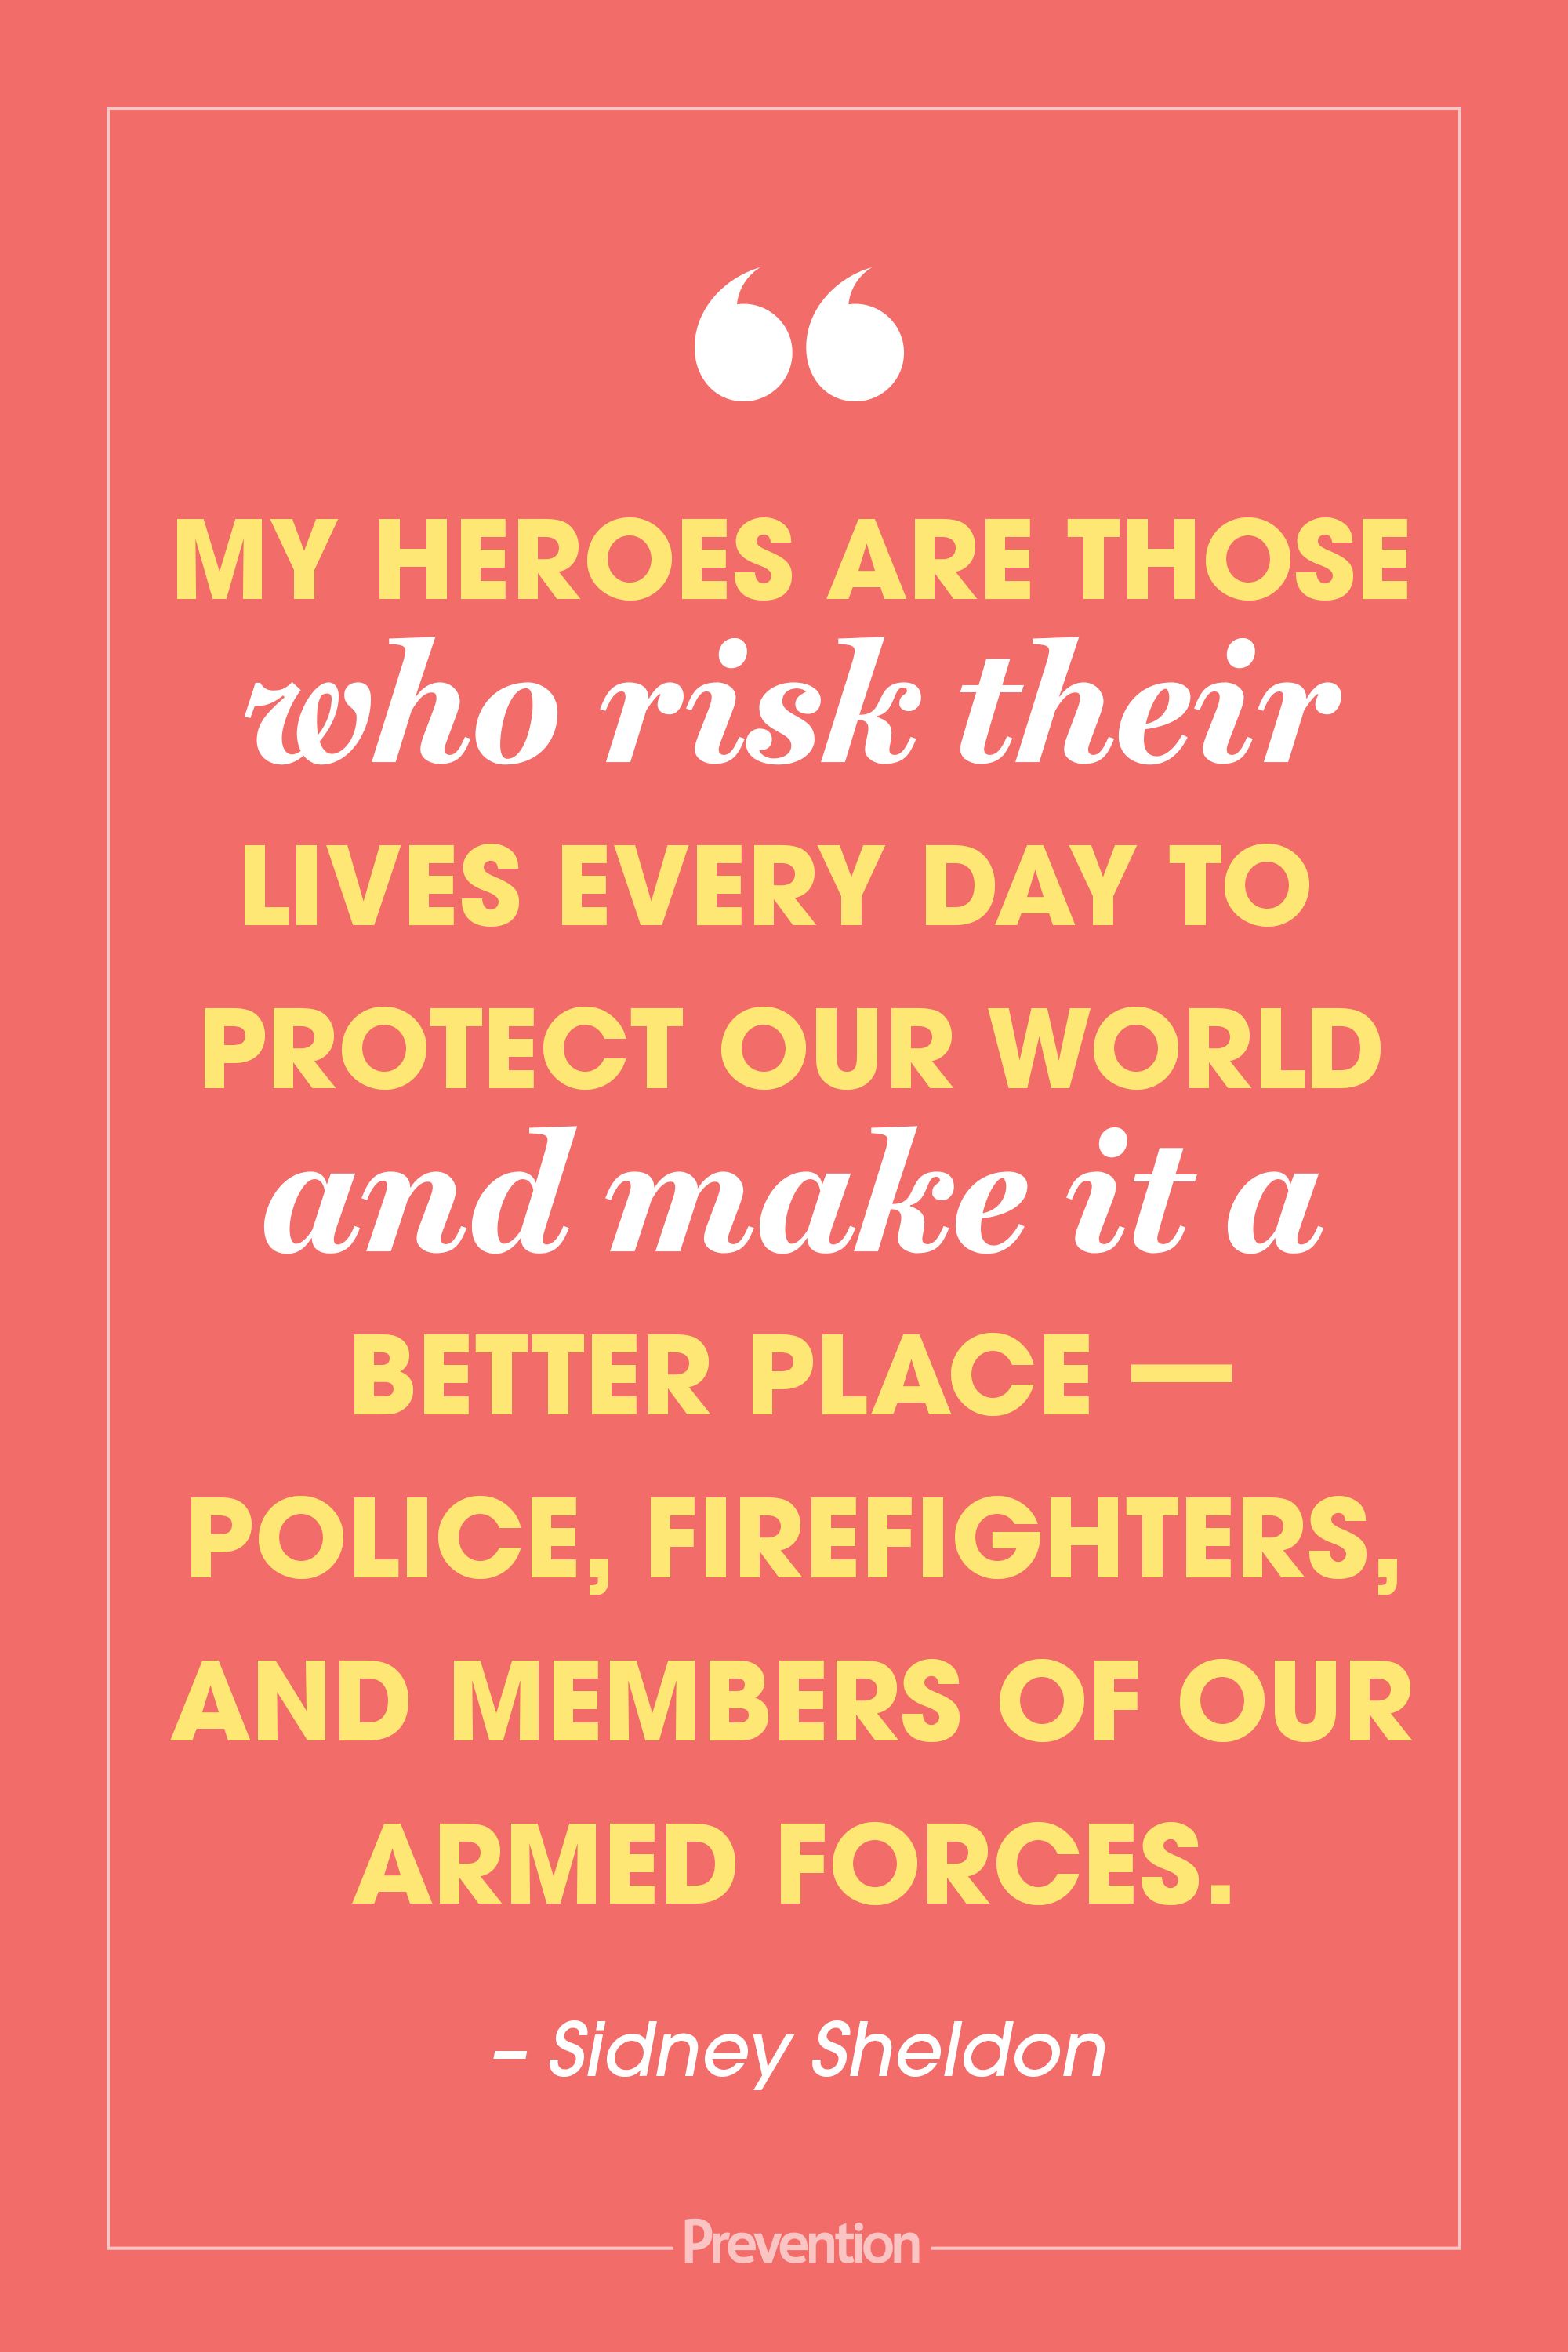 20 Inspiring Veterans Day Quotes To Honor Those Who Ve Served